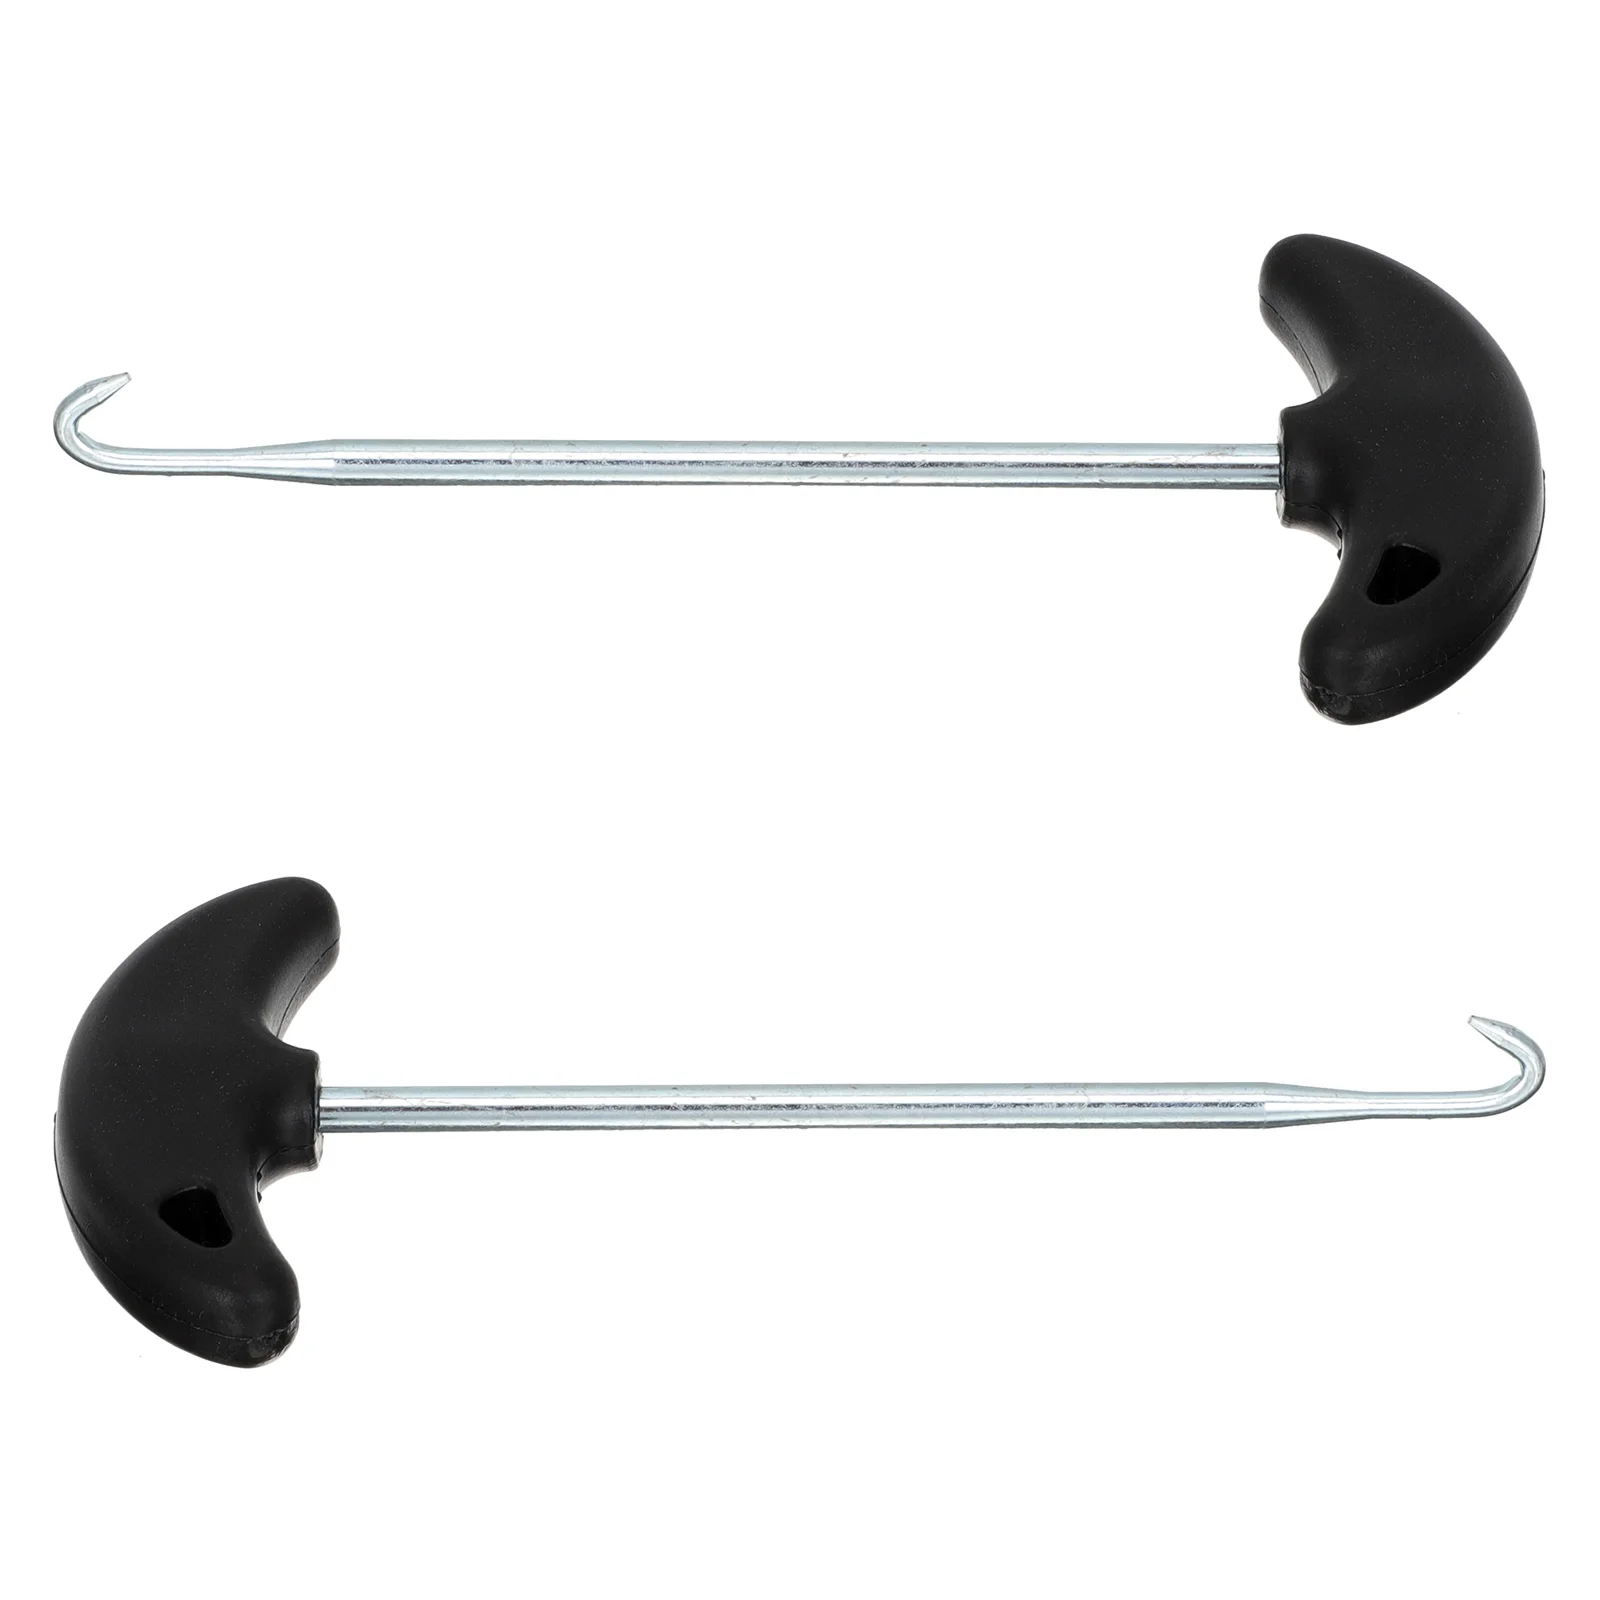 

2 Pcs Shoelace Tightener Tighteners Tightening Tool Pulling Trampoline Ice Skates Puller Abs Professional Pullers Hooks